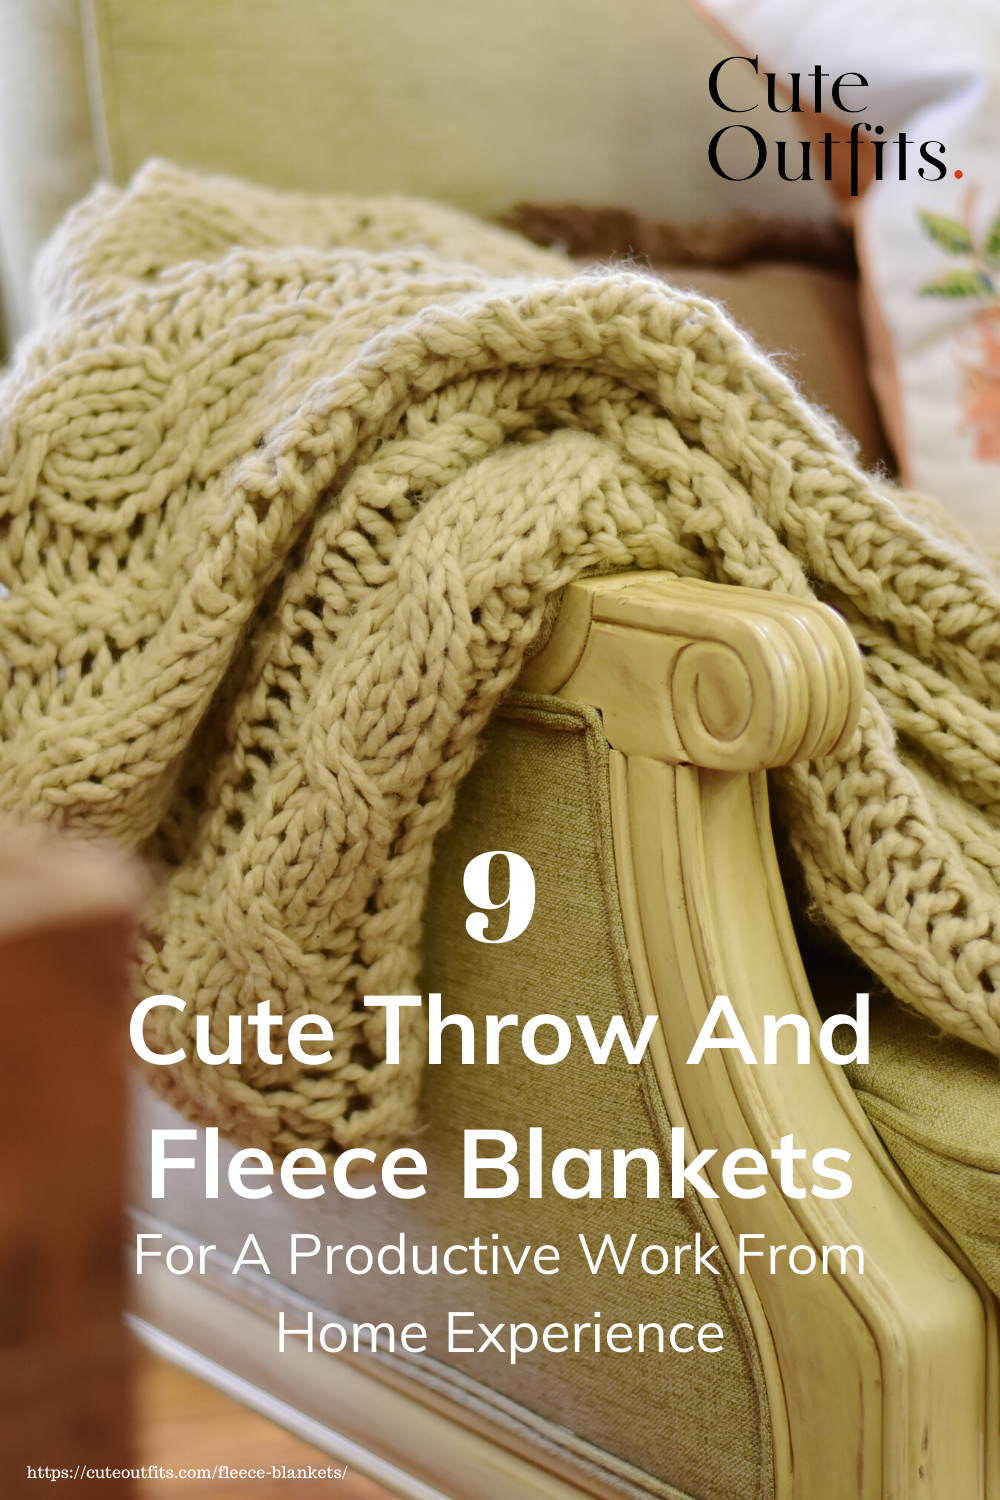 placard | 9 Cute Throw And Fleece Blankets For A Warm And Productive Work From Home Experience